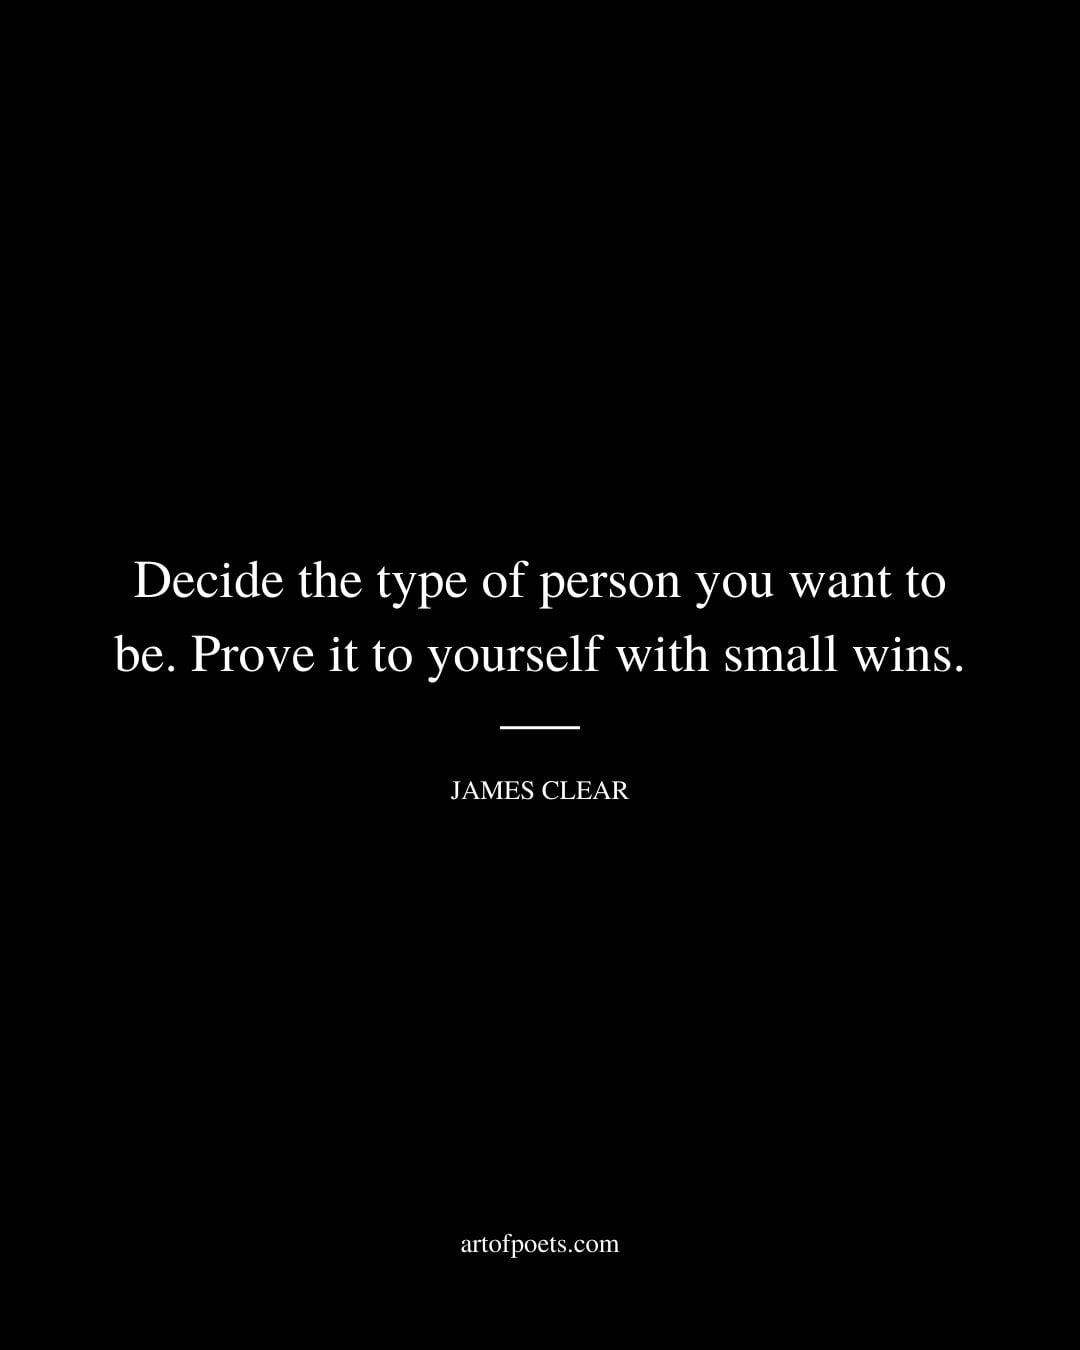 Decide the type of person you want to be. Prove it to yourself with small wins